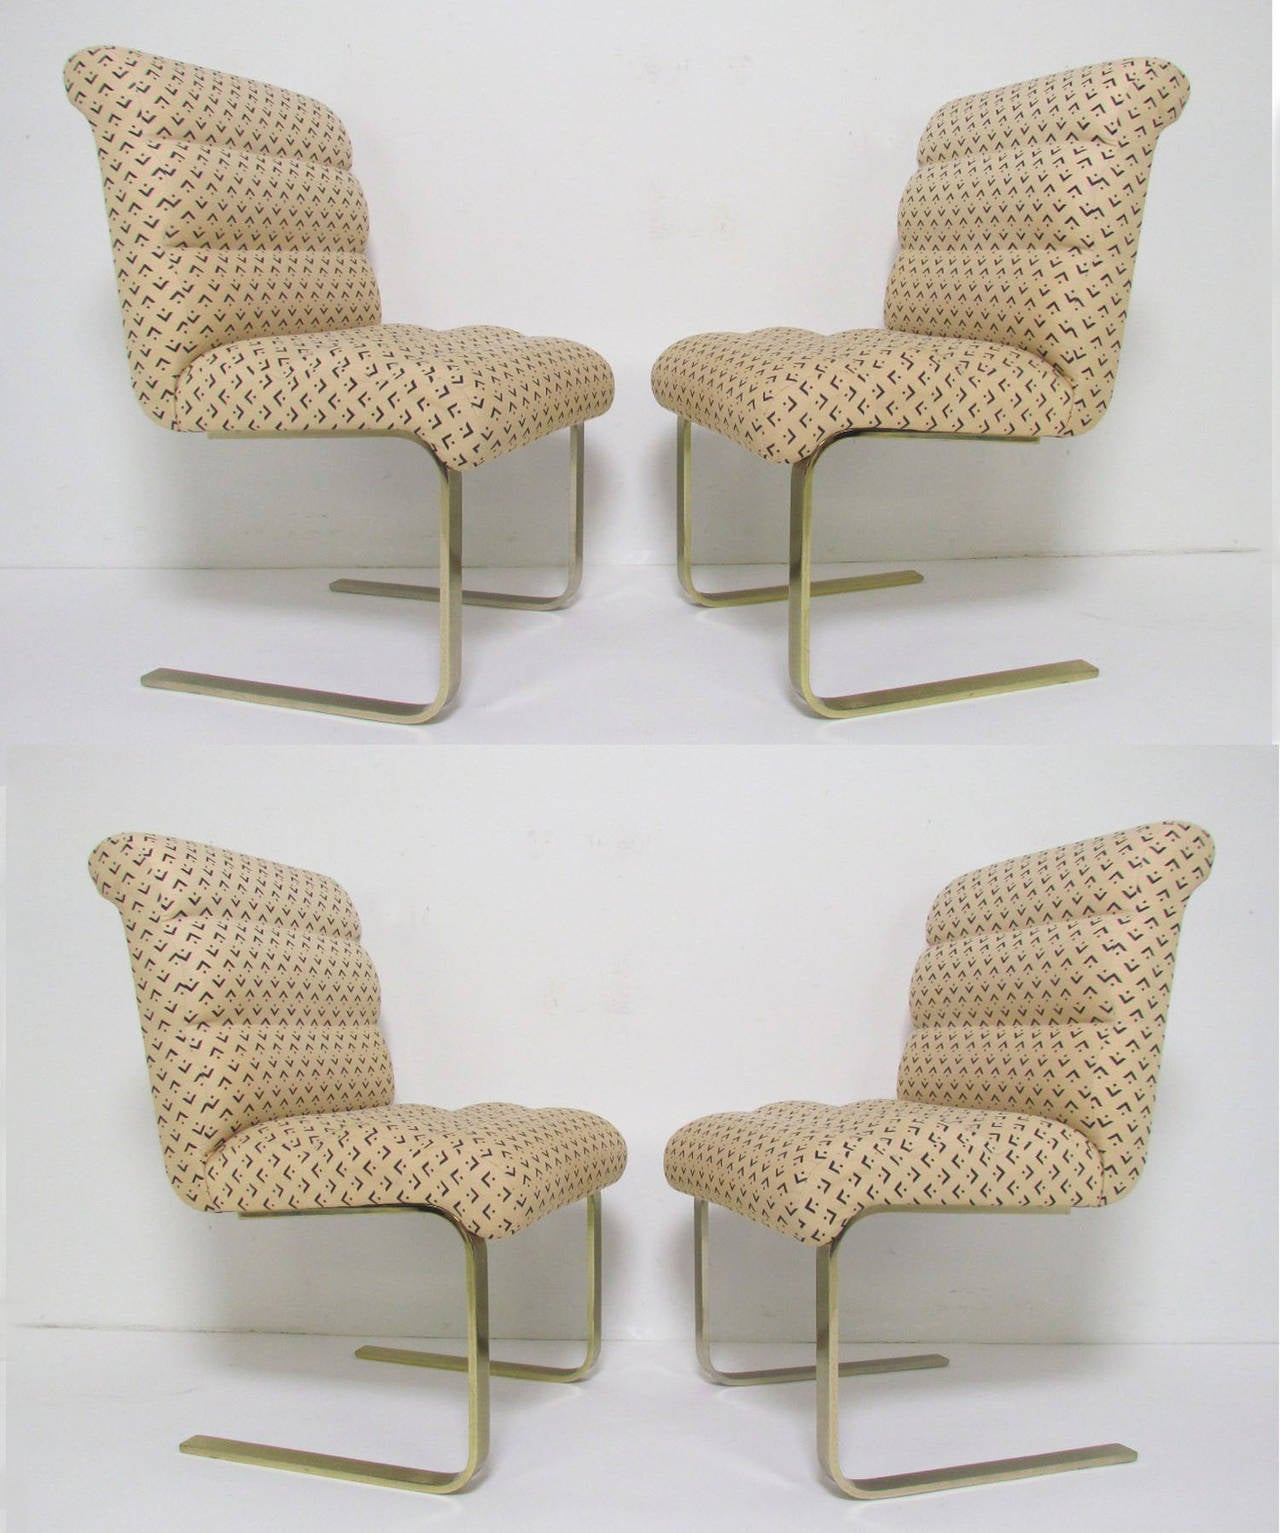 Set of four Lugano cantilevered dining chairs in polished brass finish by Mariani for Pace Collection, ca. 1970s.